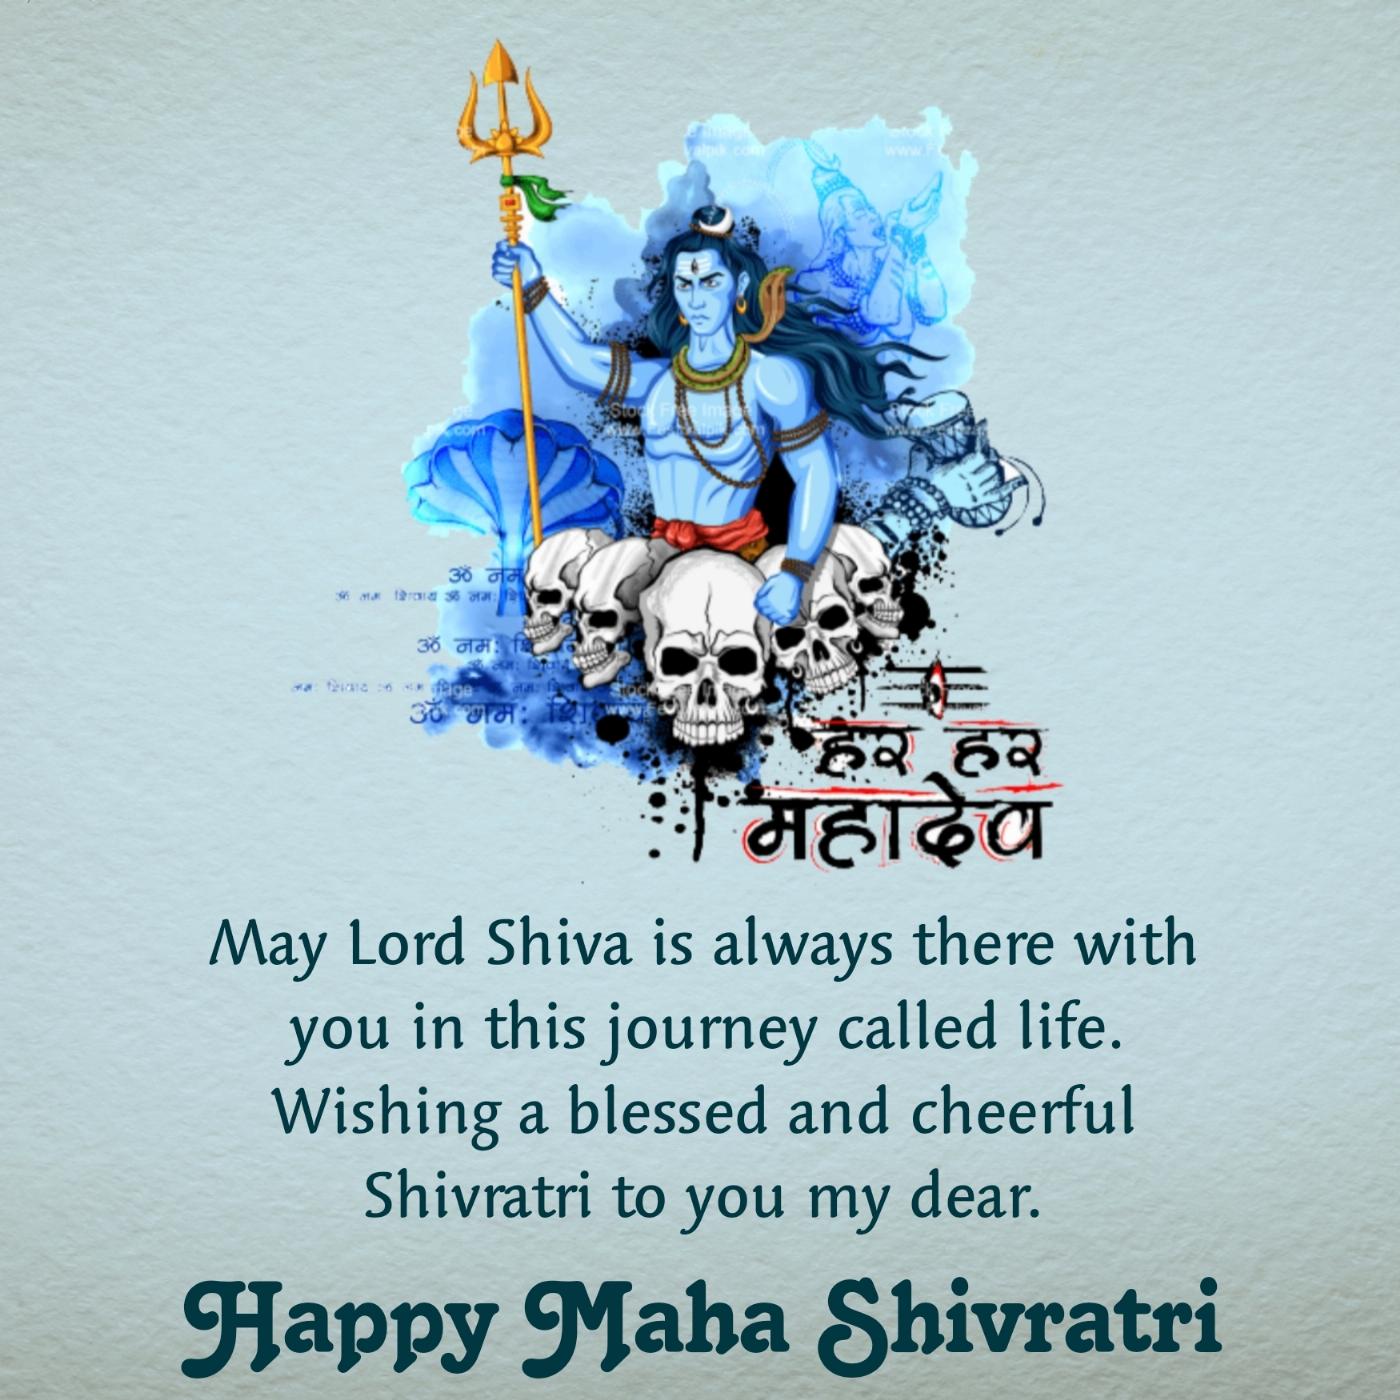 May Lord Shiva is always there with you in this journey called life